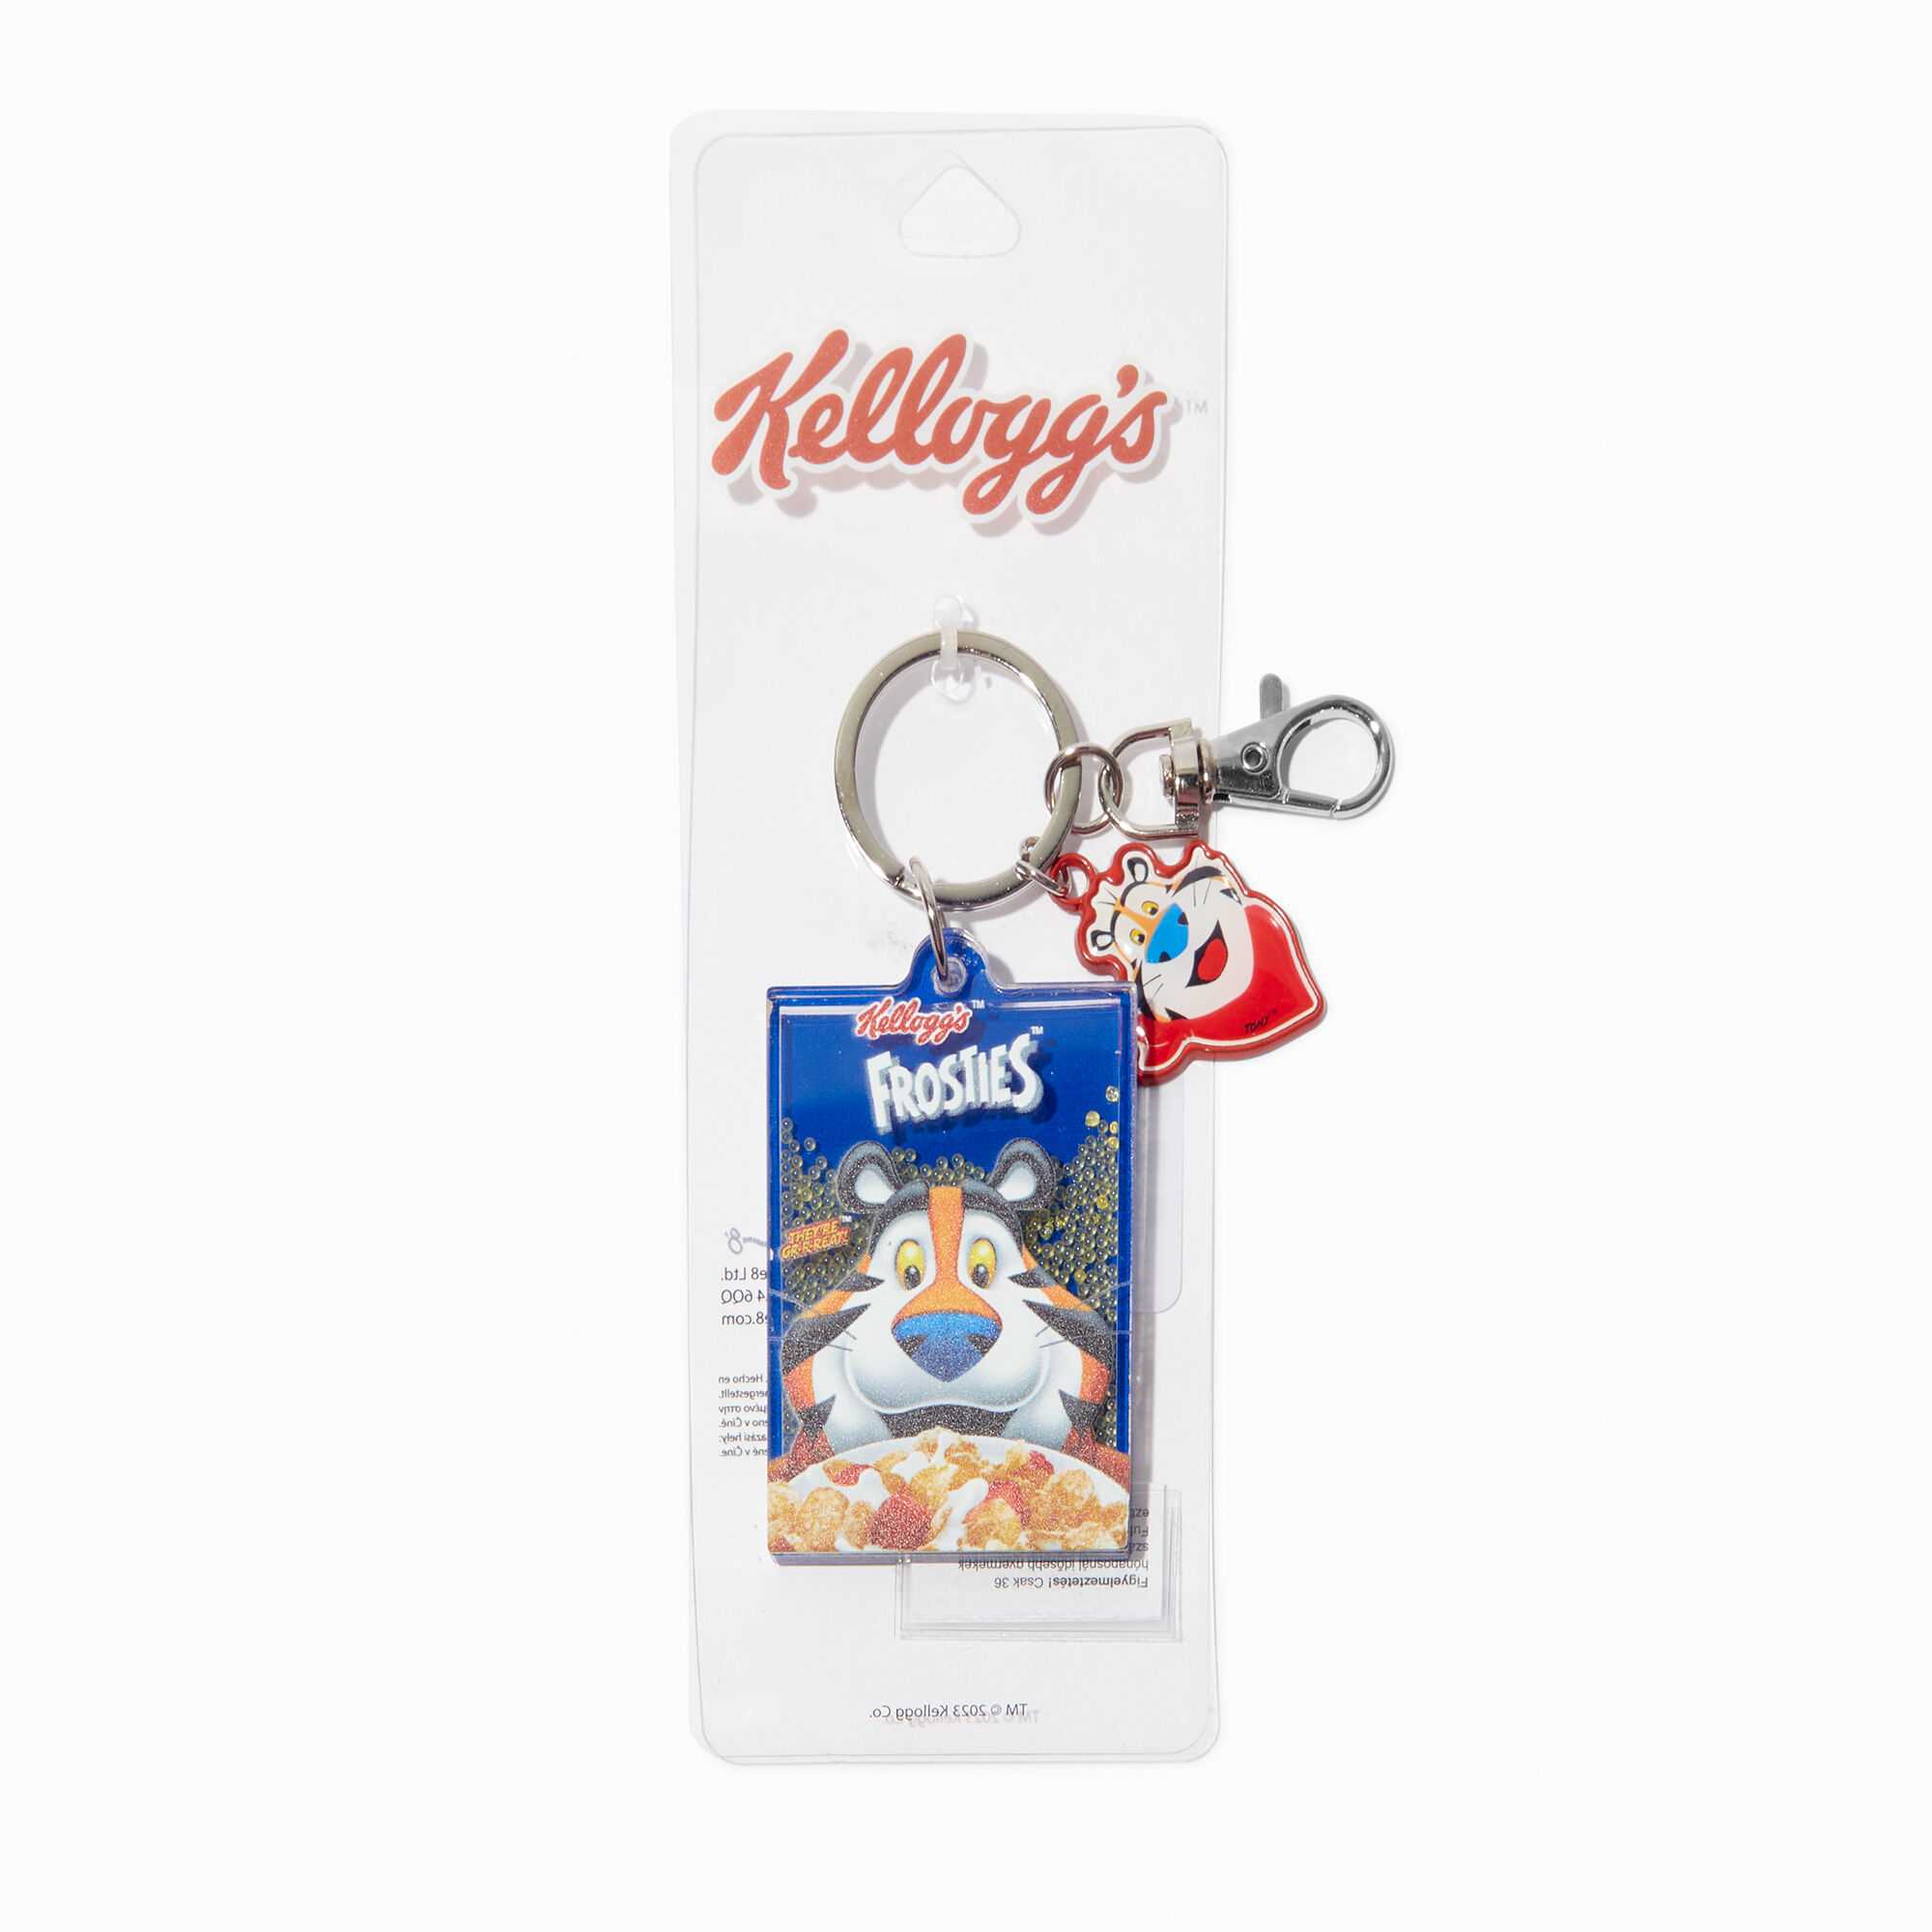 View Claires Kellogs Frosties Keyring Shaker information